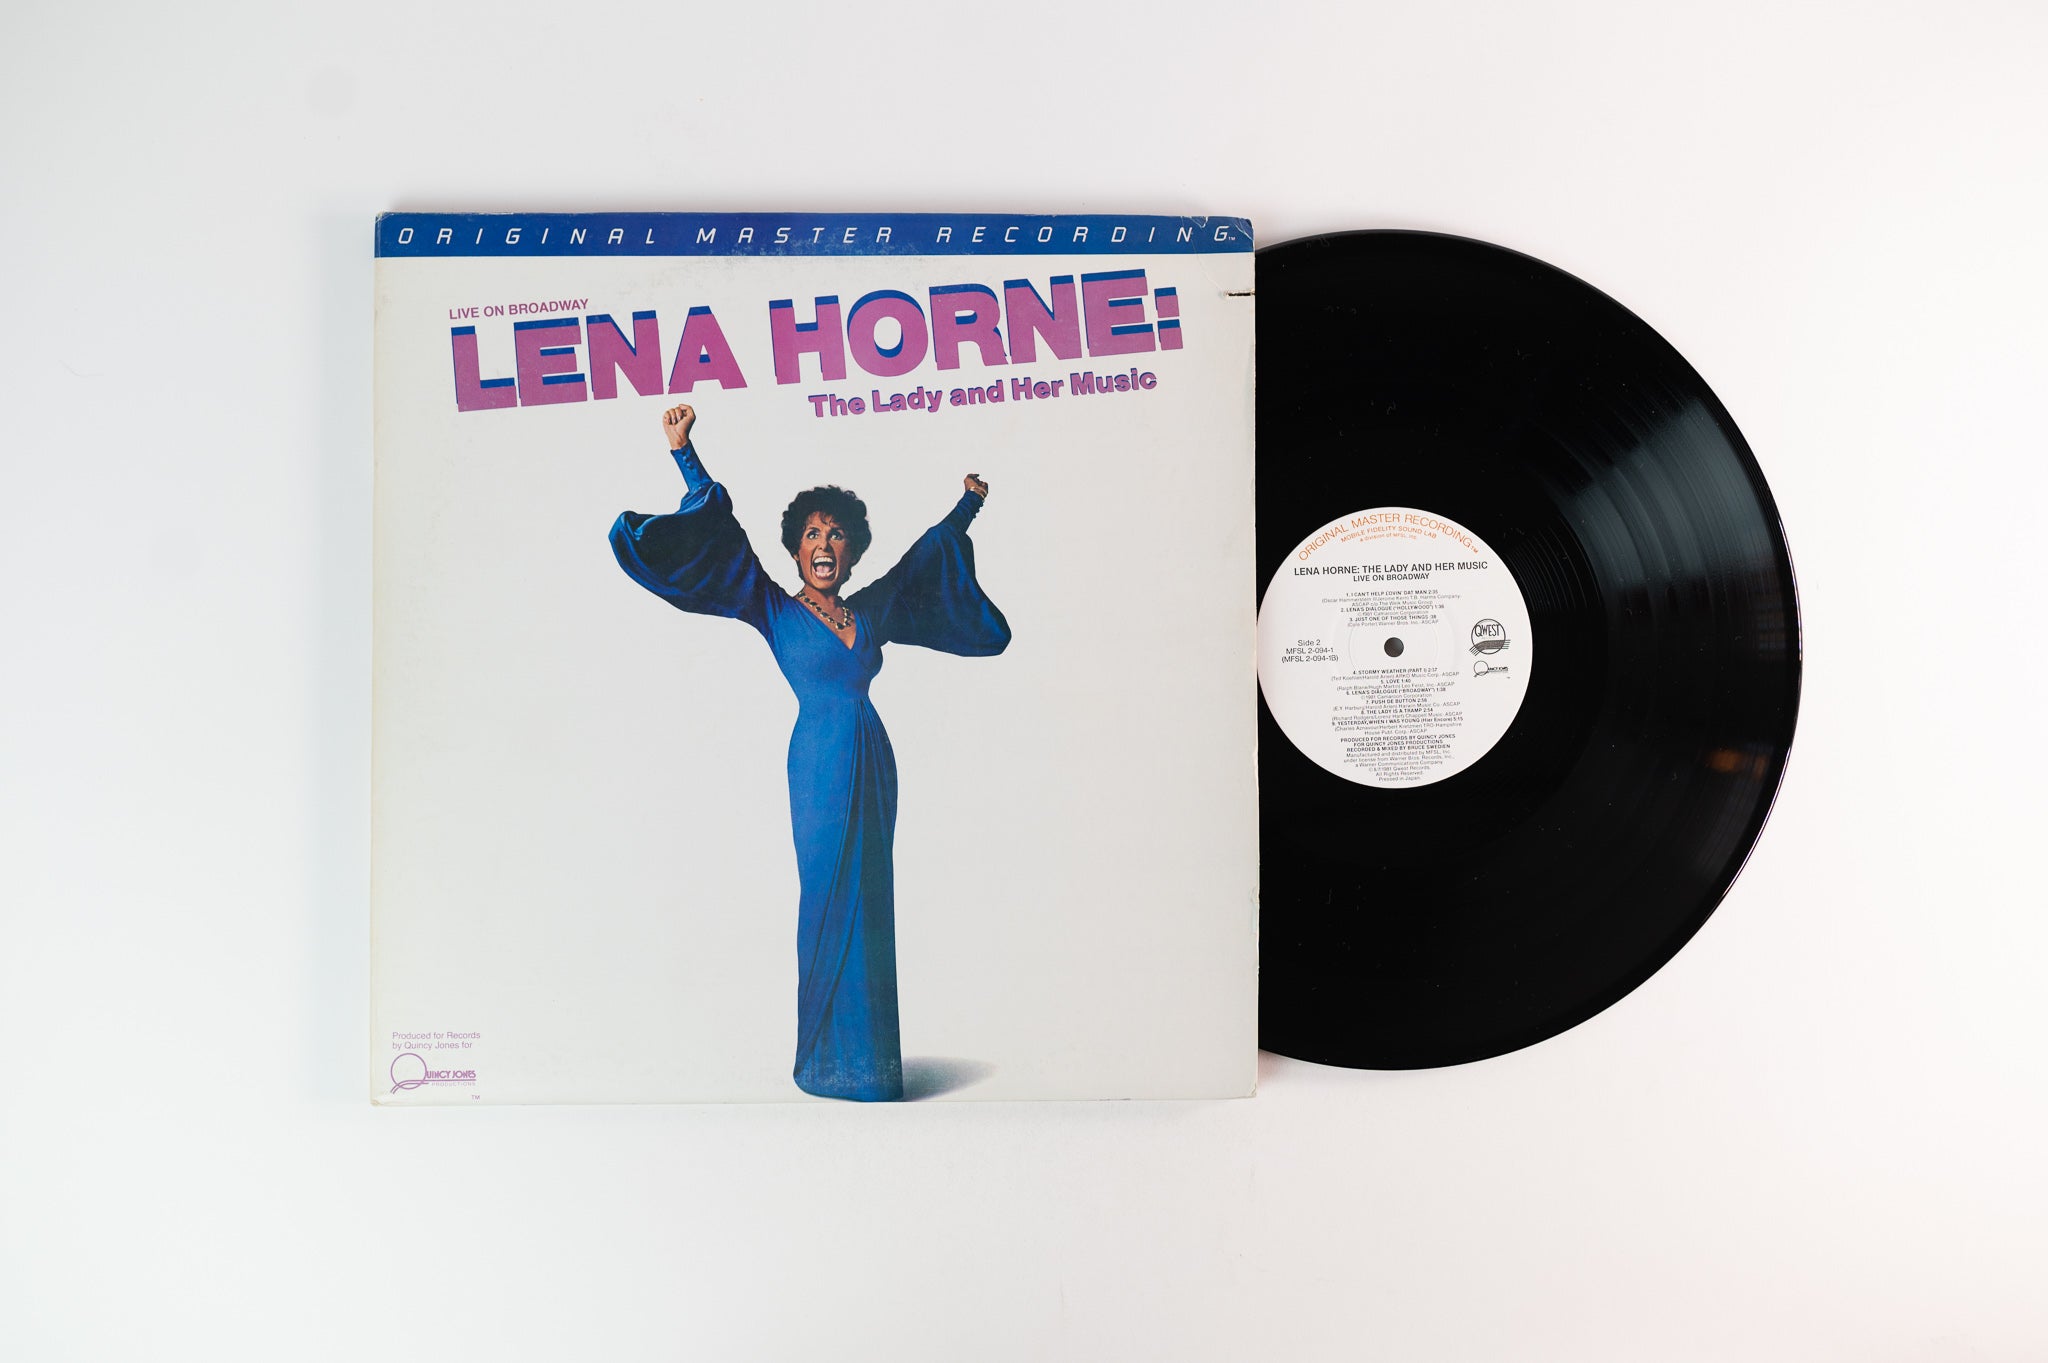 Lena Horne - Live On Broadway Lena Horne: The Lady And Her Music on Mobile Fidelity Sound Lab